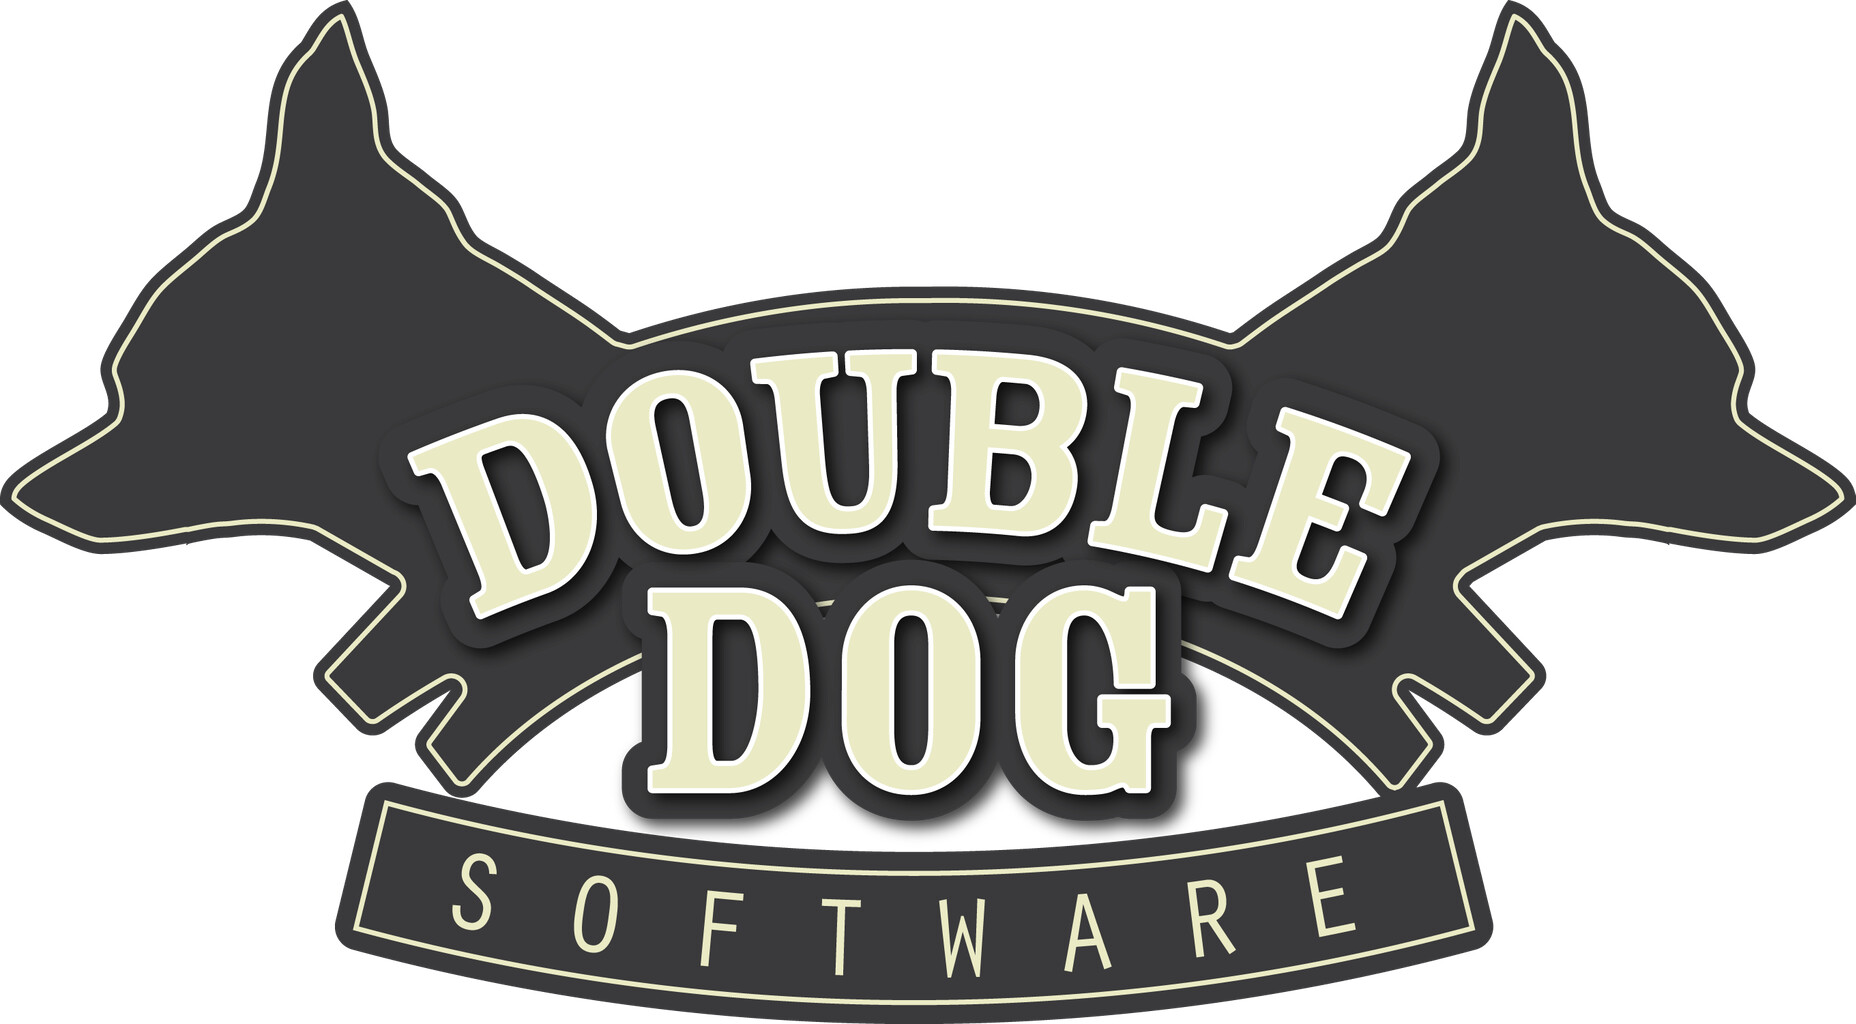 Support DoubleDog Software